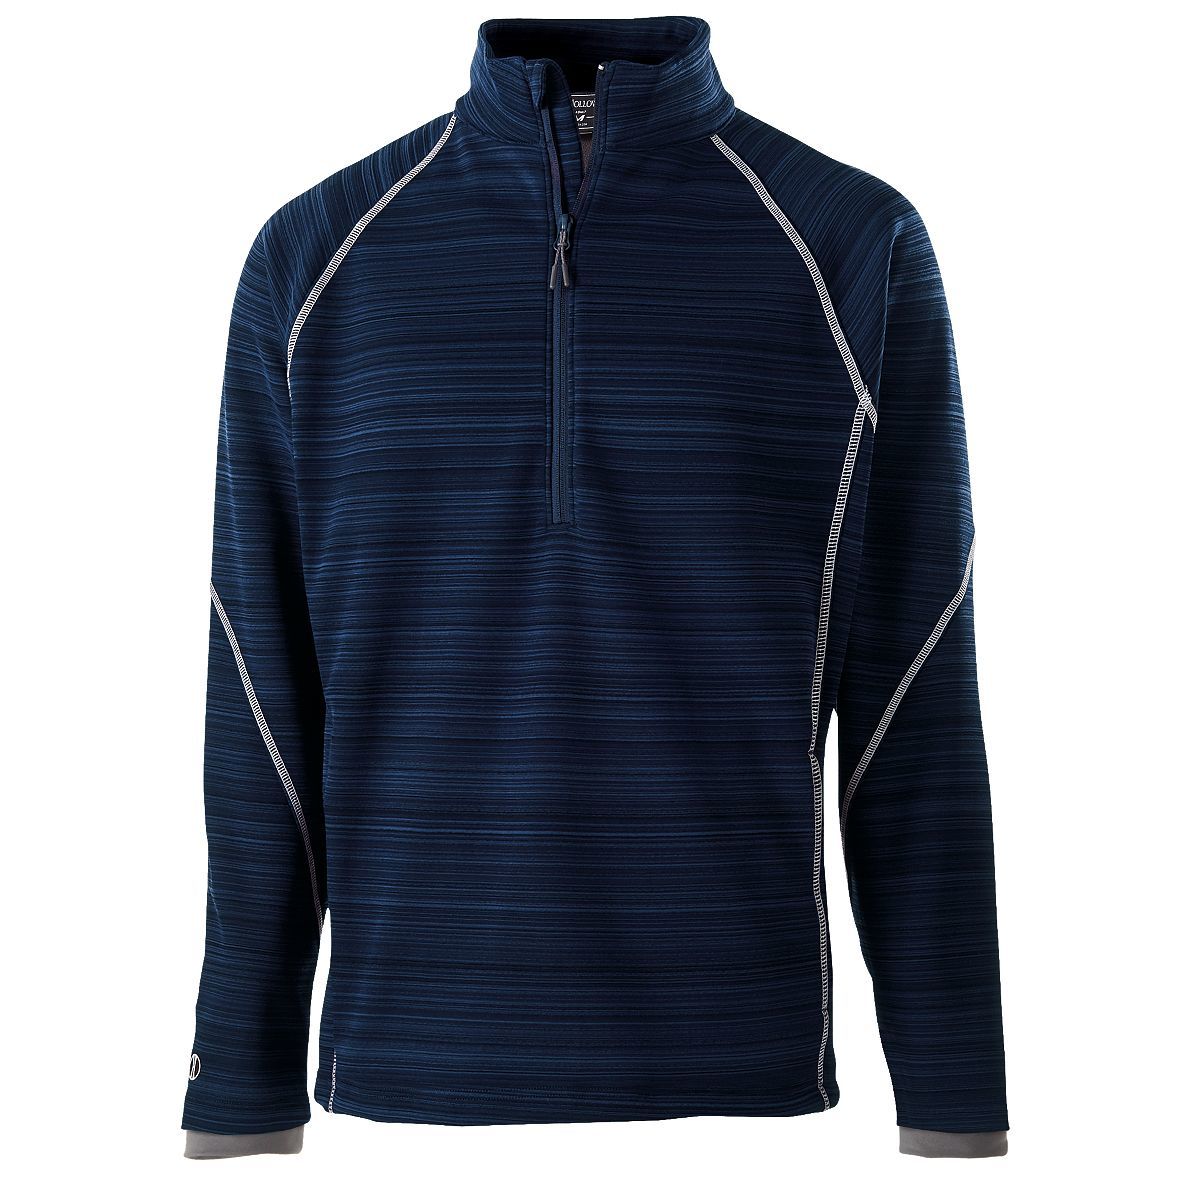 Holloway Deviate Pullover in Navy  -Part of the Adult, Adult-Pullover, Holloway, Outerwear product lines at KanaleyCreations.com